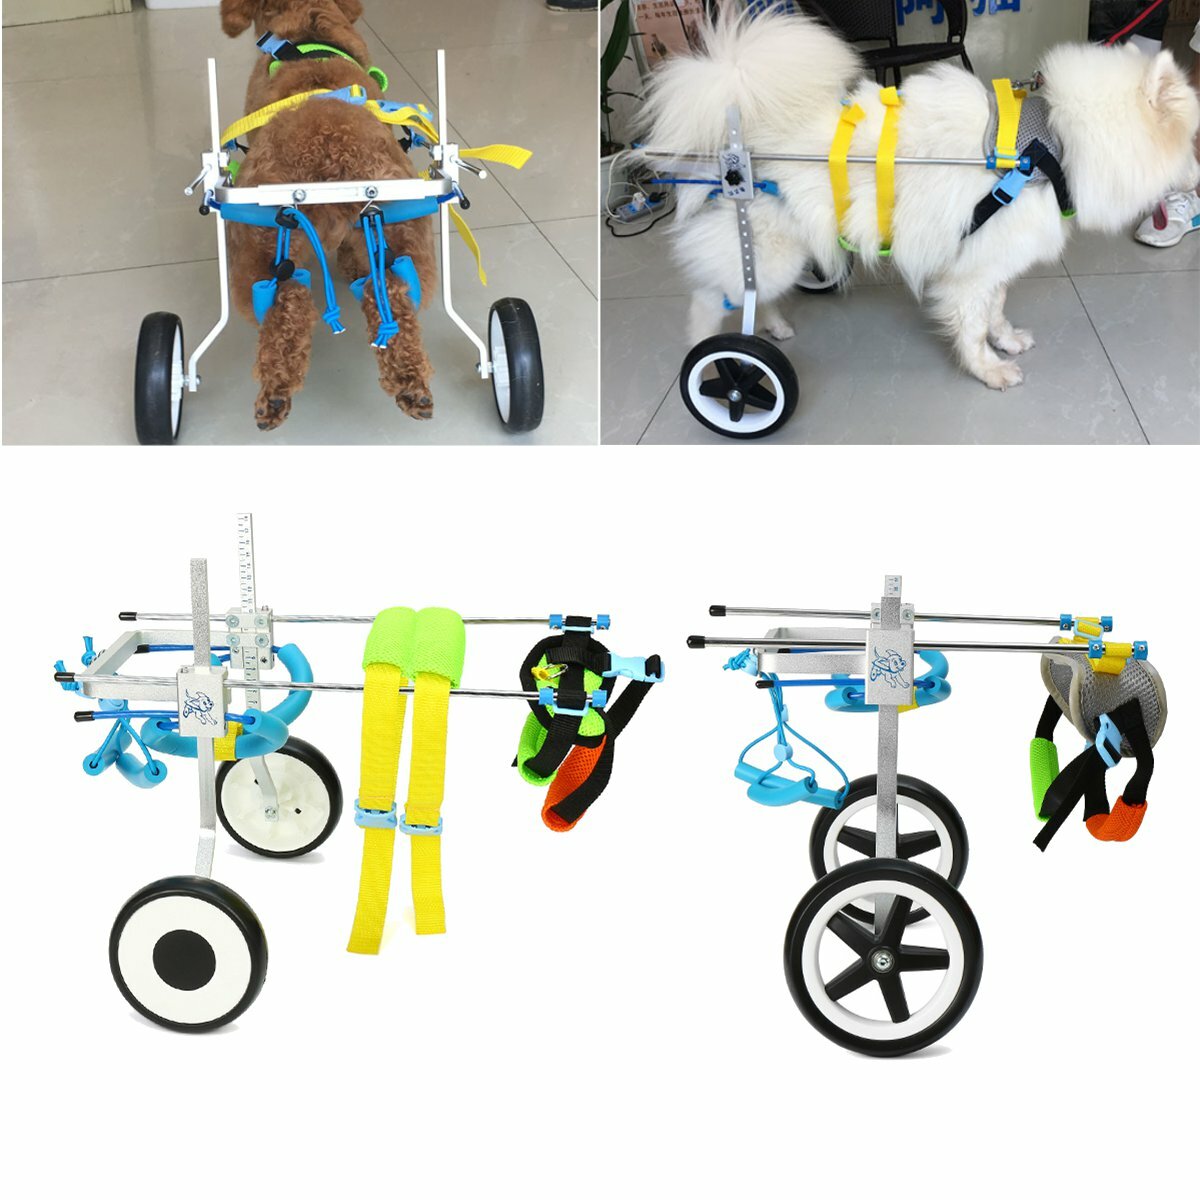 Pet Dog Wheelchair for Handicapped Small Cat Scooter Run Walking Folding Chair Disabled Paralysis Puppy Cart Legs Suppor